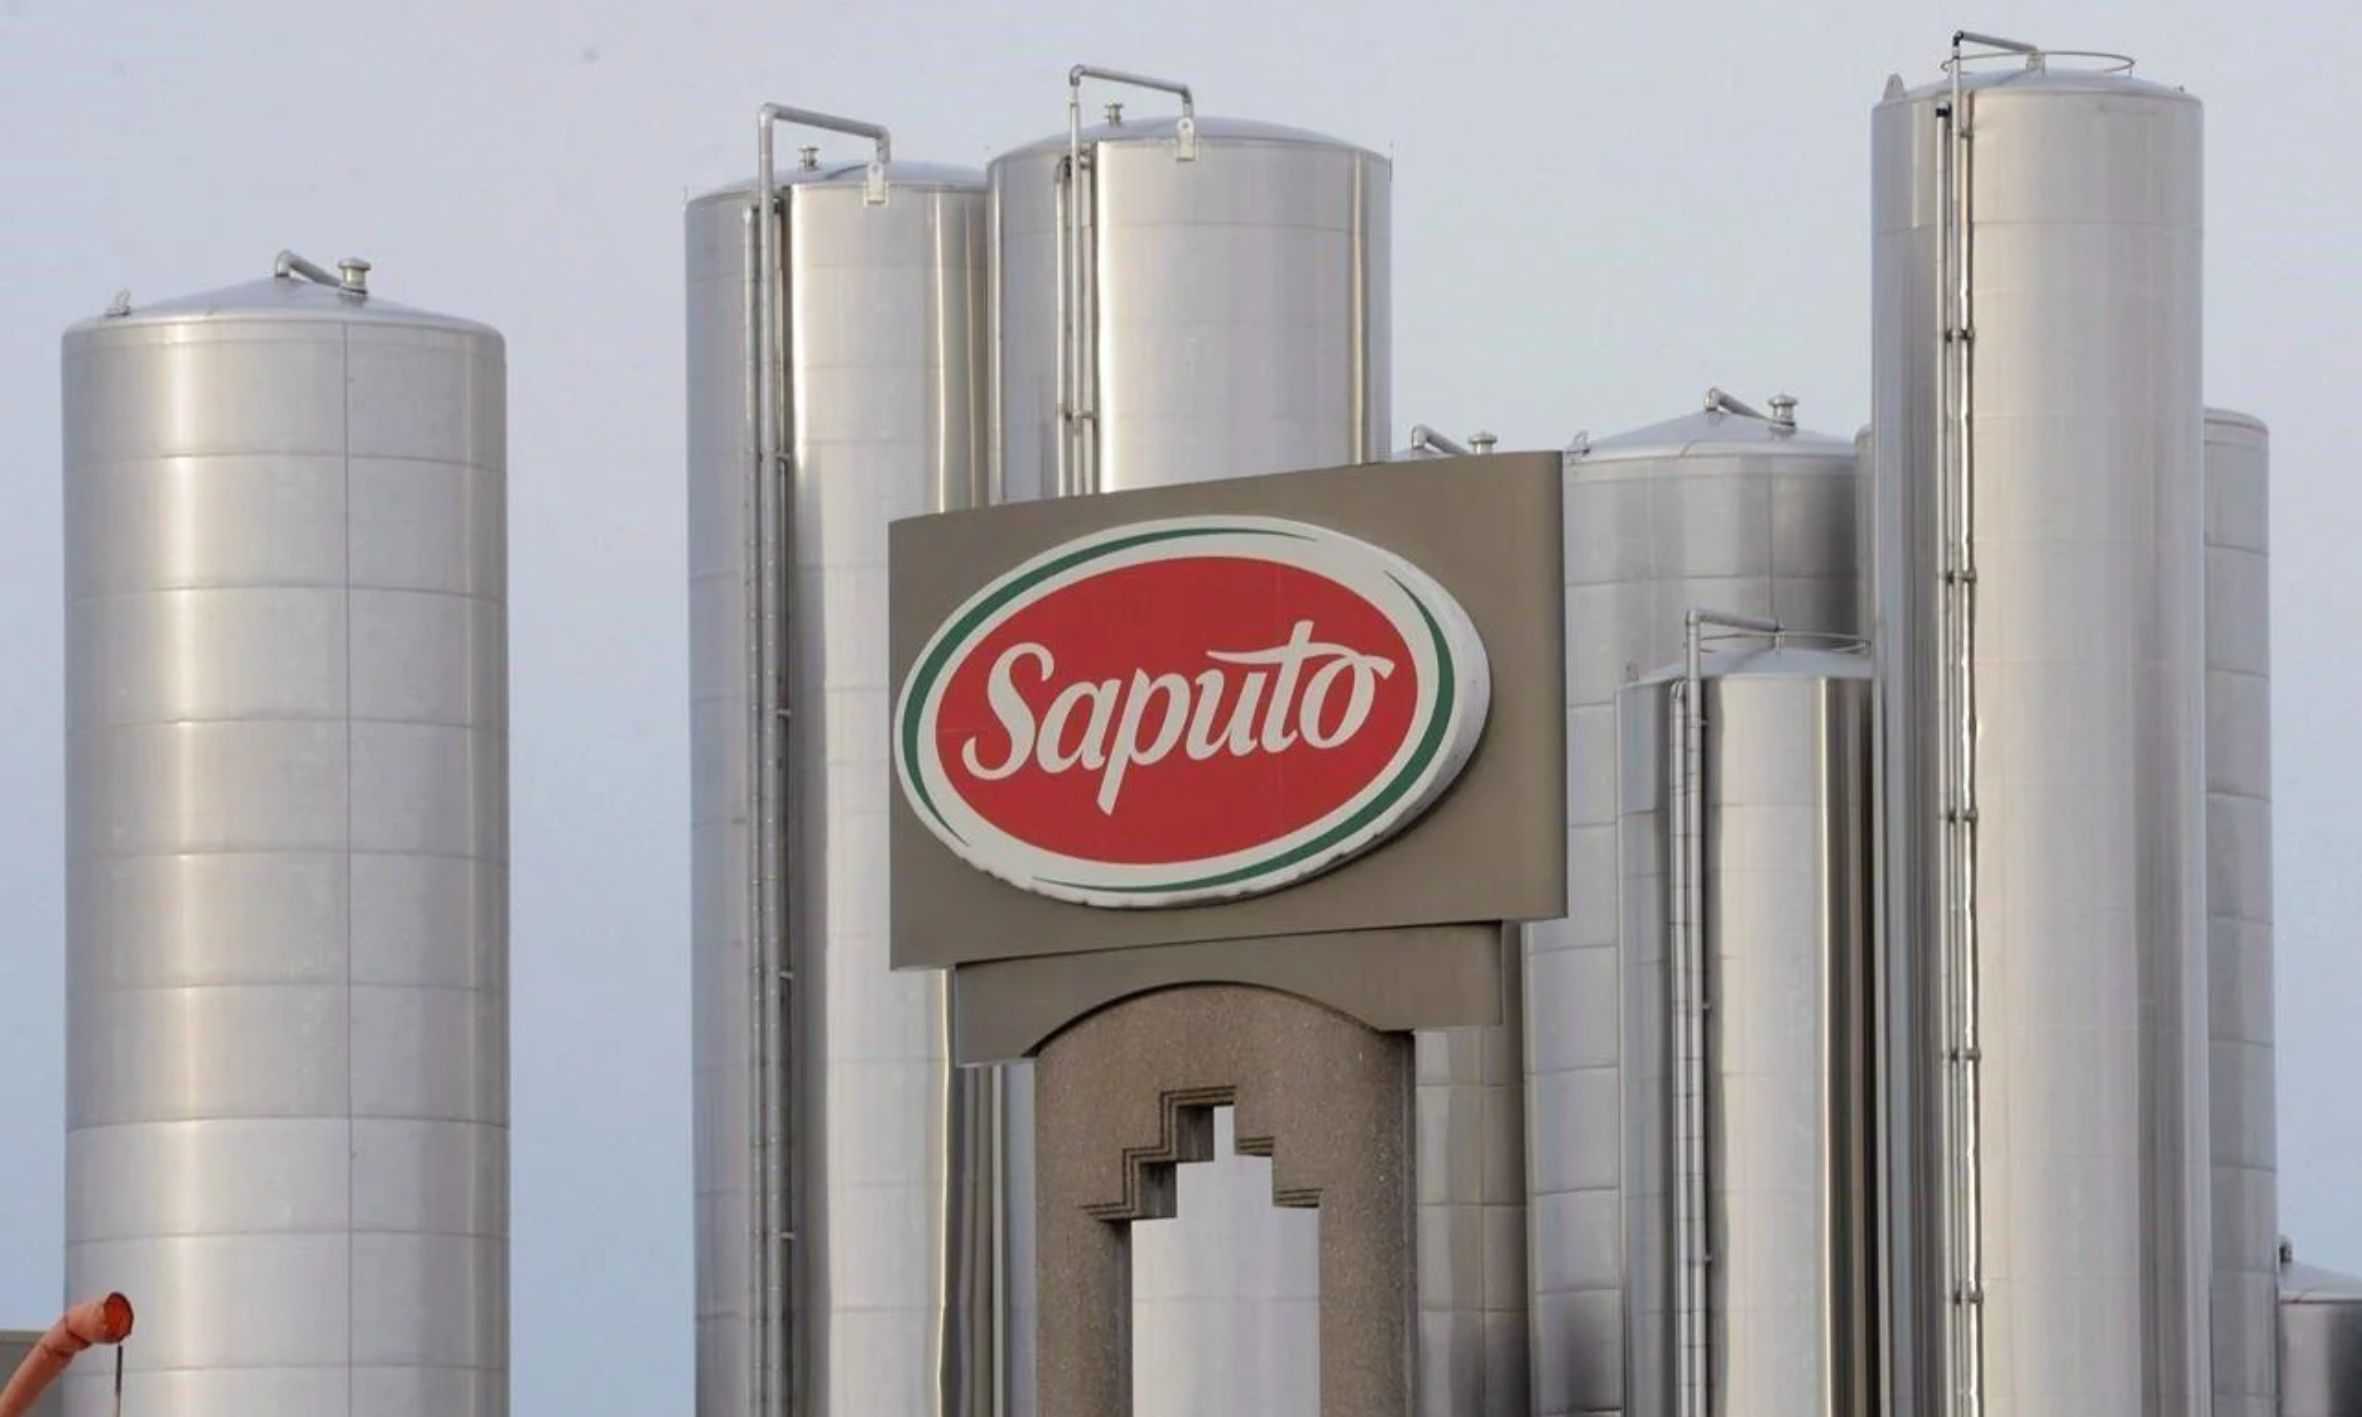 Saputo sees earnings rise to $156 million in second quarter